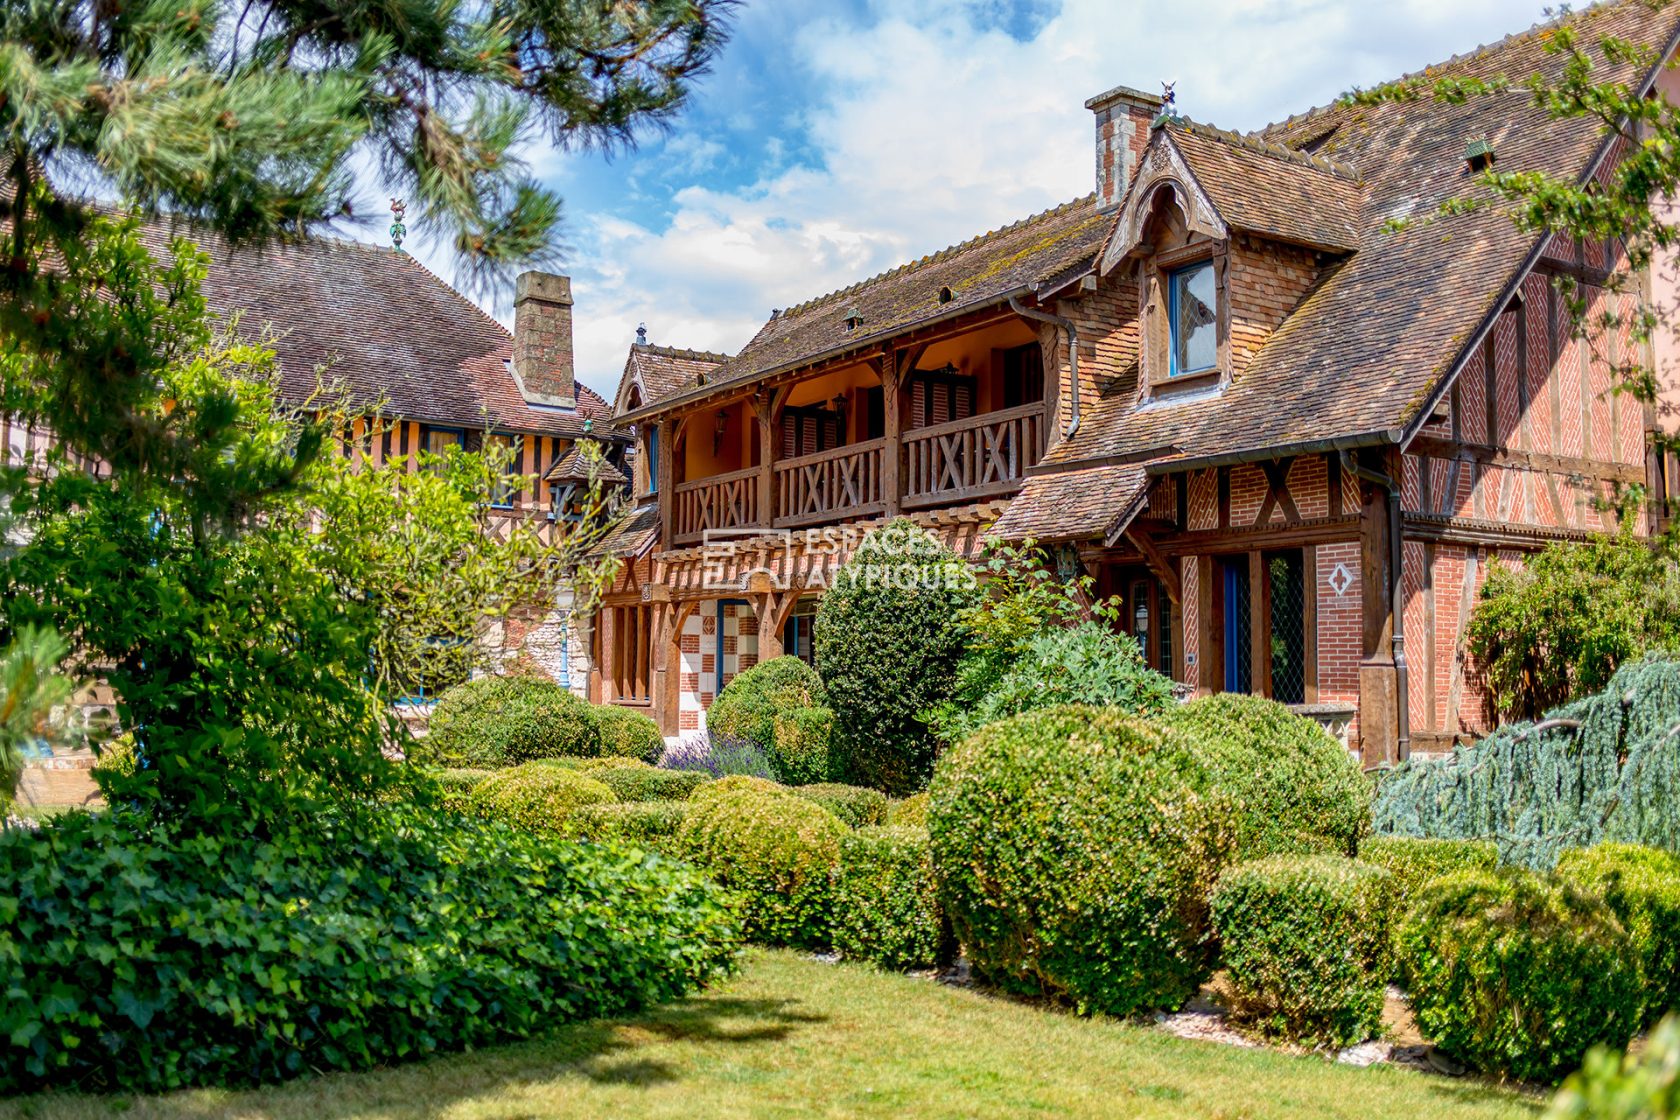 Enchanting Anglo-Norman manor from the 19th century